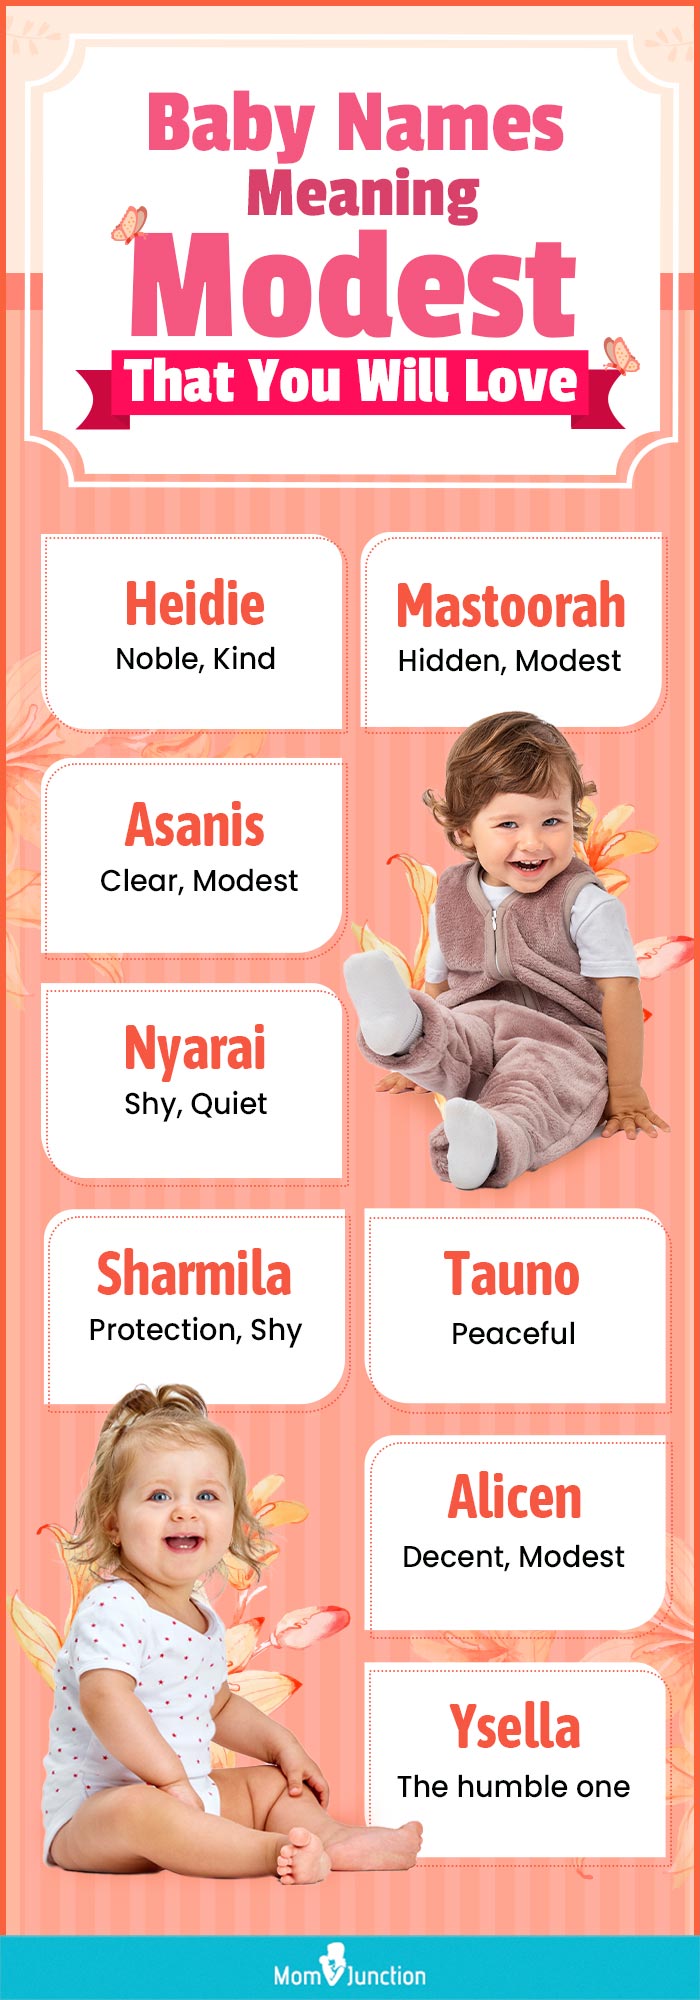 baby names meaning modest that you will love (infographic)